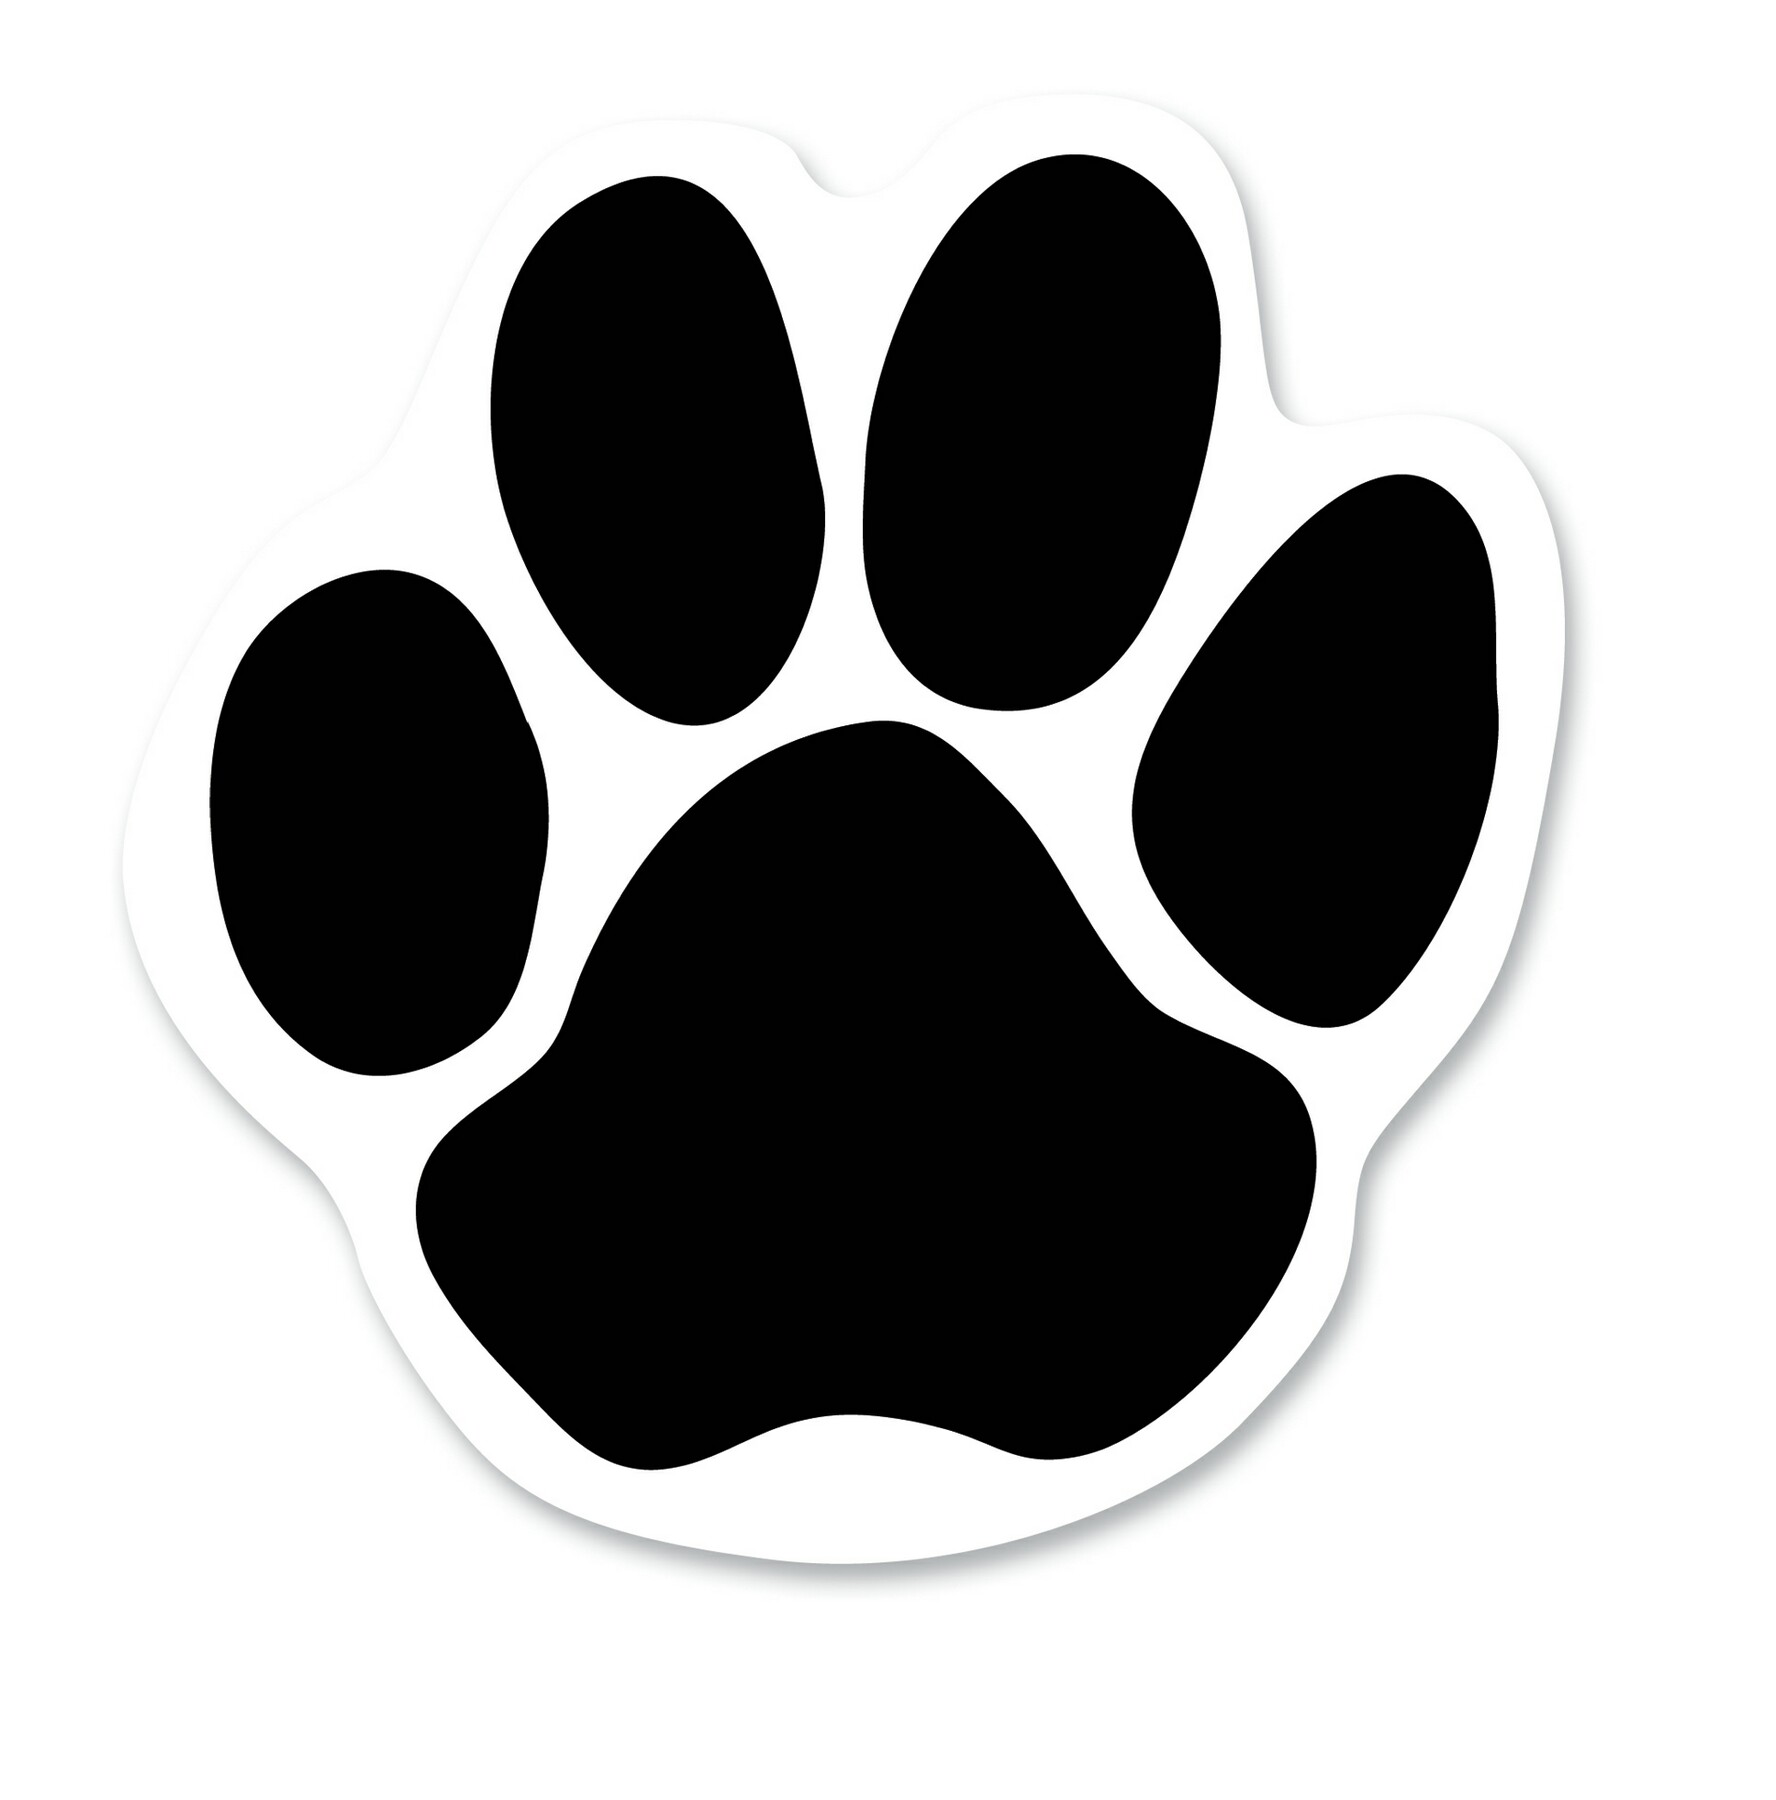 Bear Paw Print Outline - Clipart library